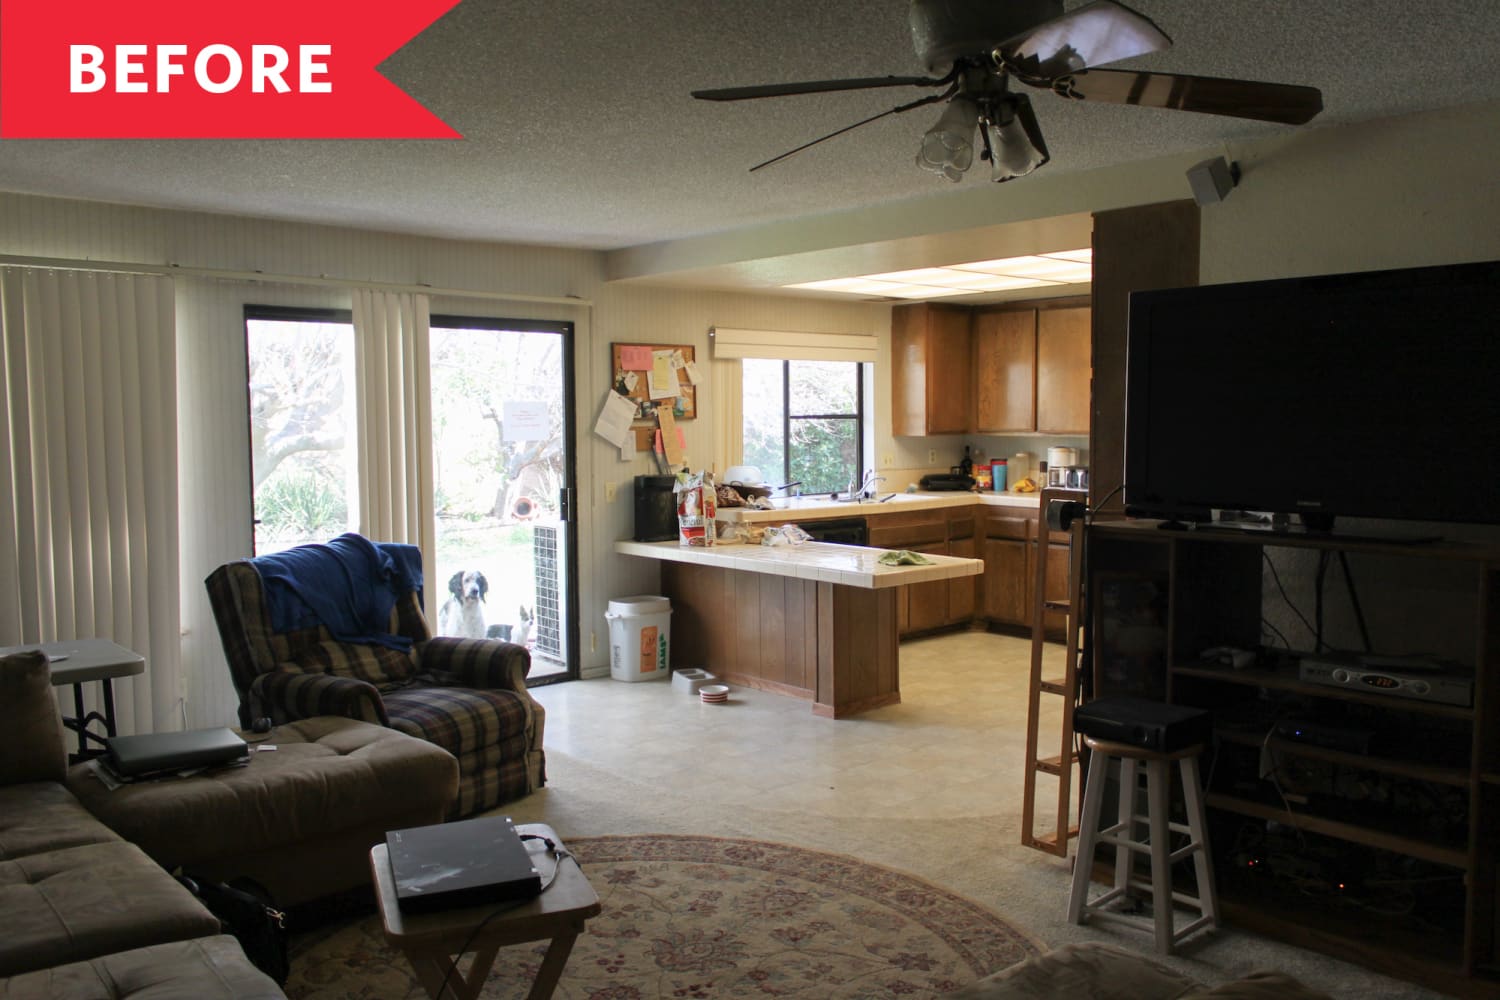 Before & After: A Couple Gave Their SoCal Fixer-Upper a Light-Filled New Look